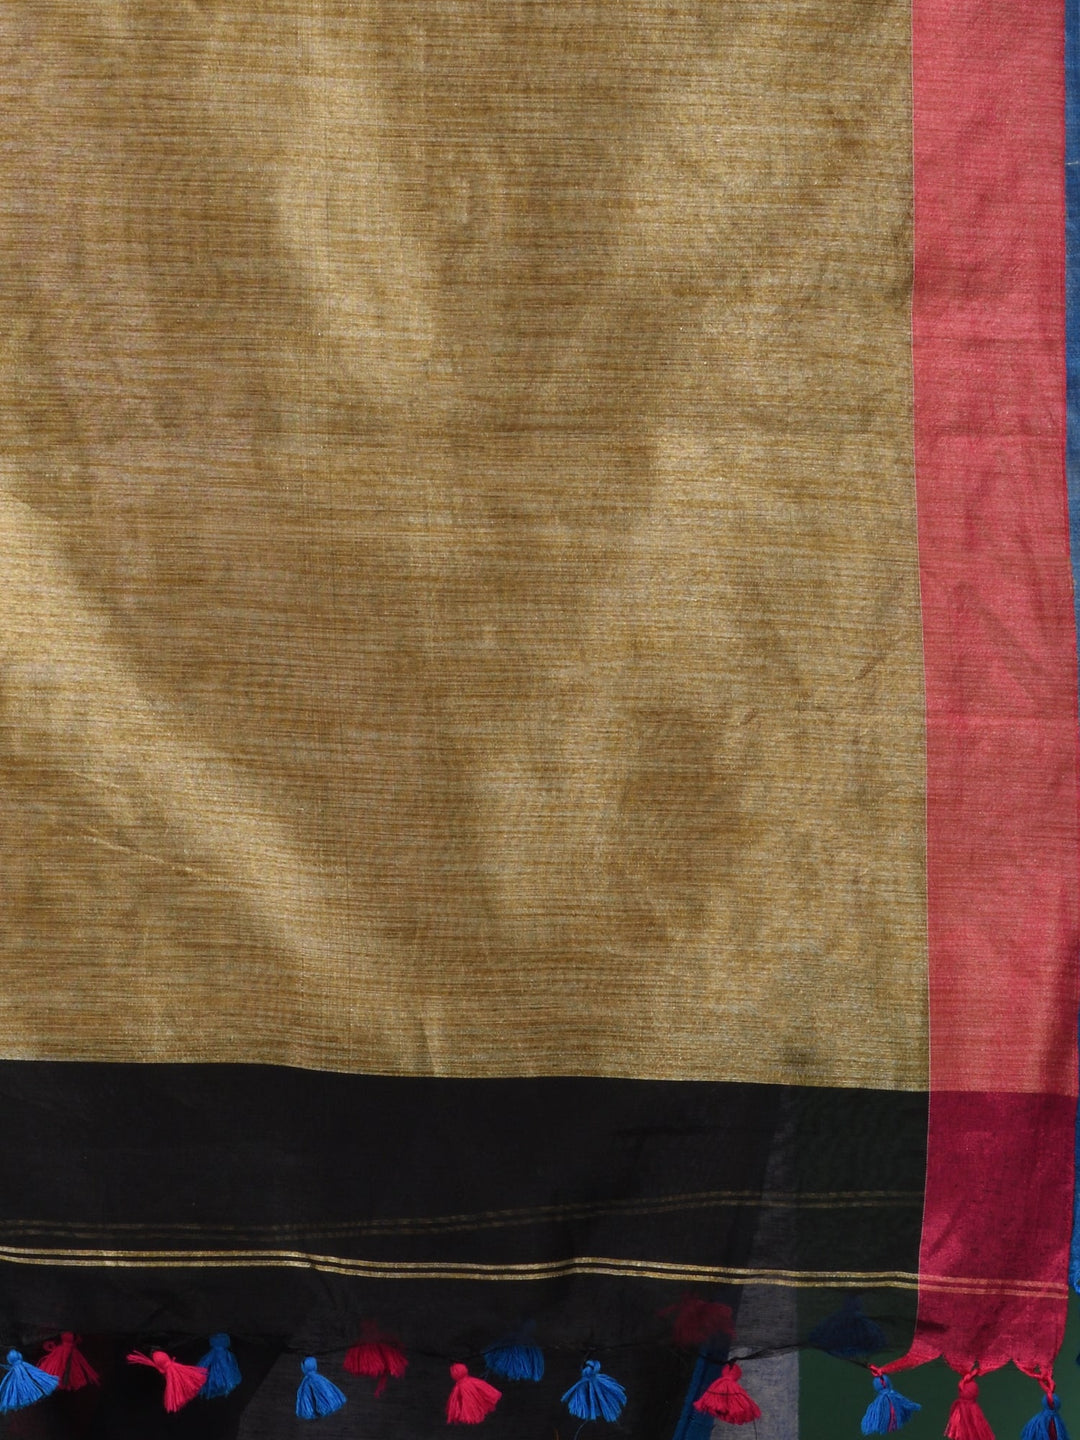 CHARUKRITI Black Cotton Soft Saree with Dual Bordar with Unstitched Blouse